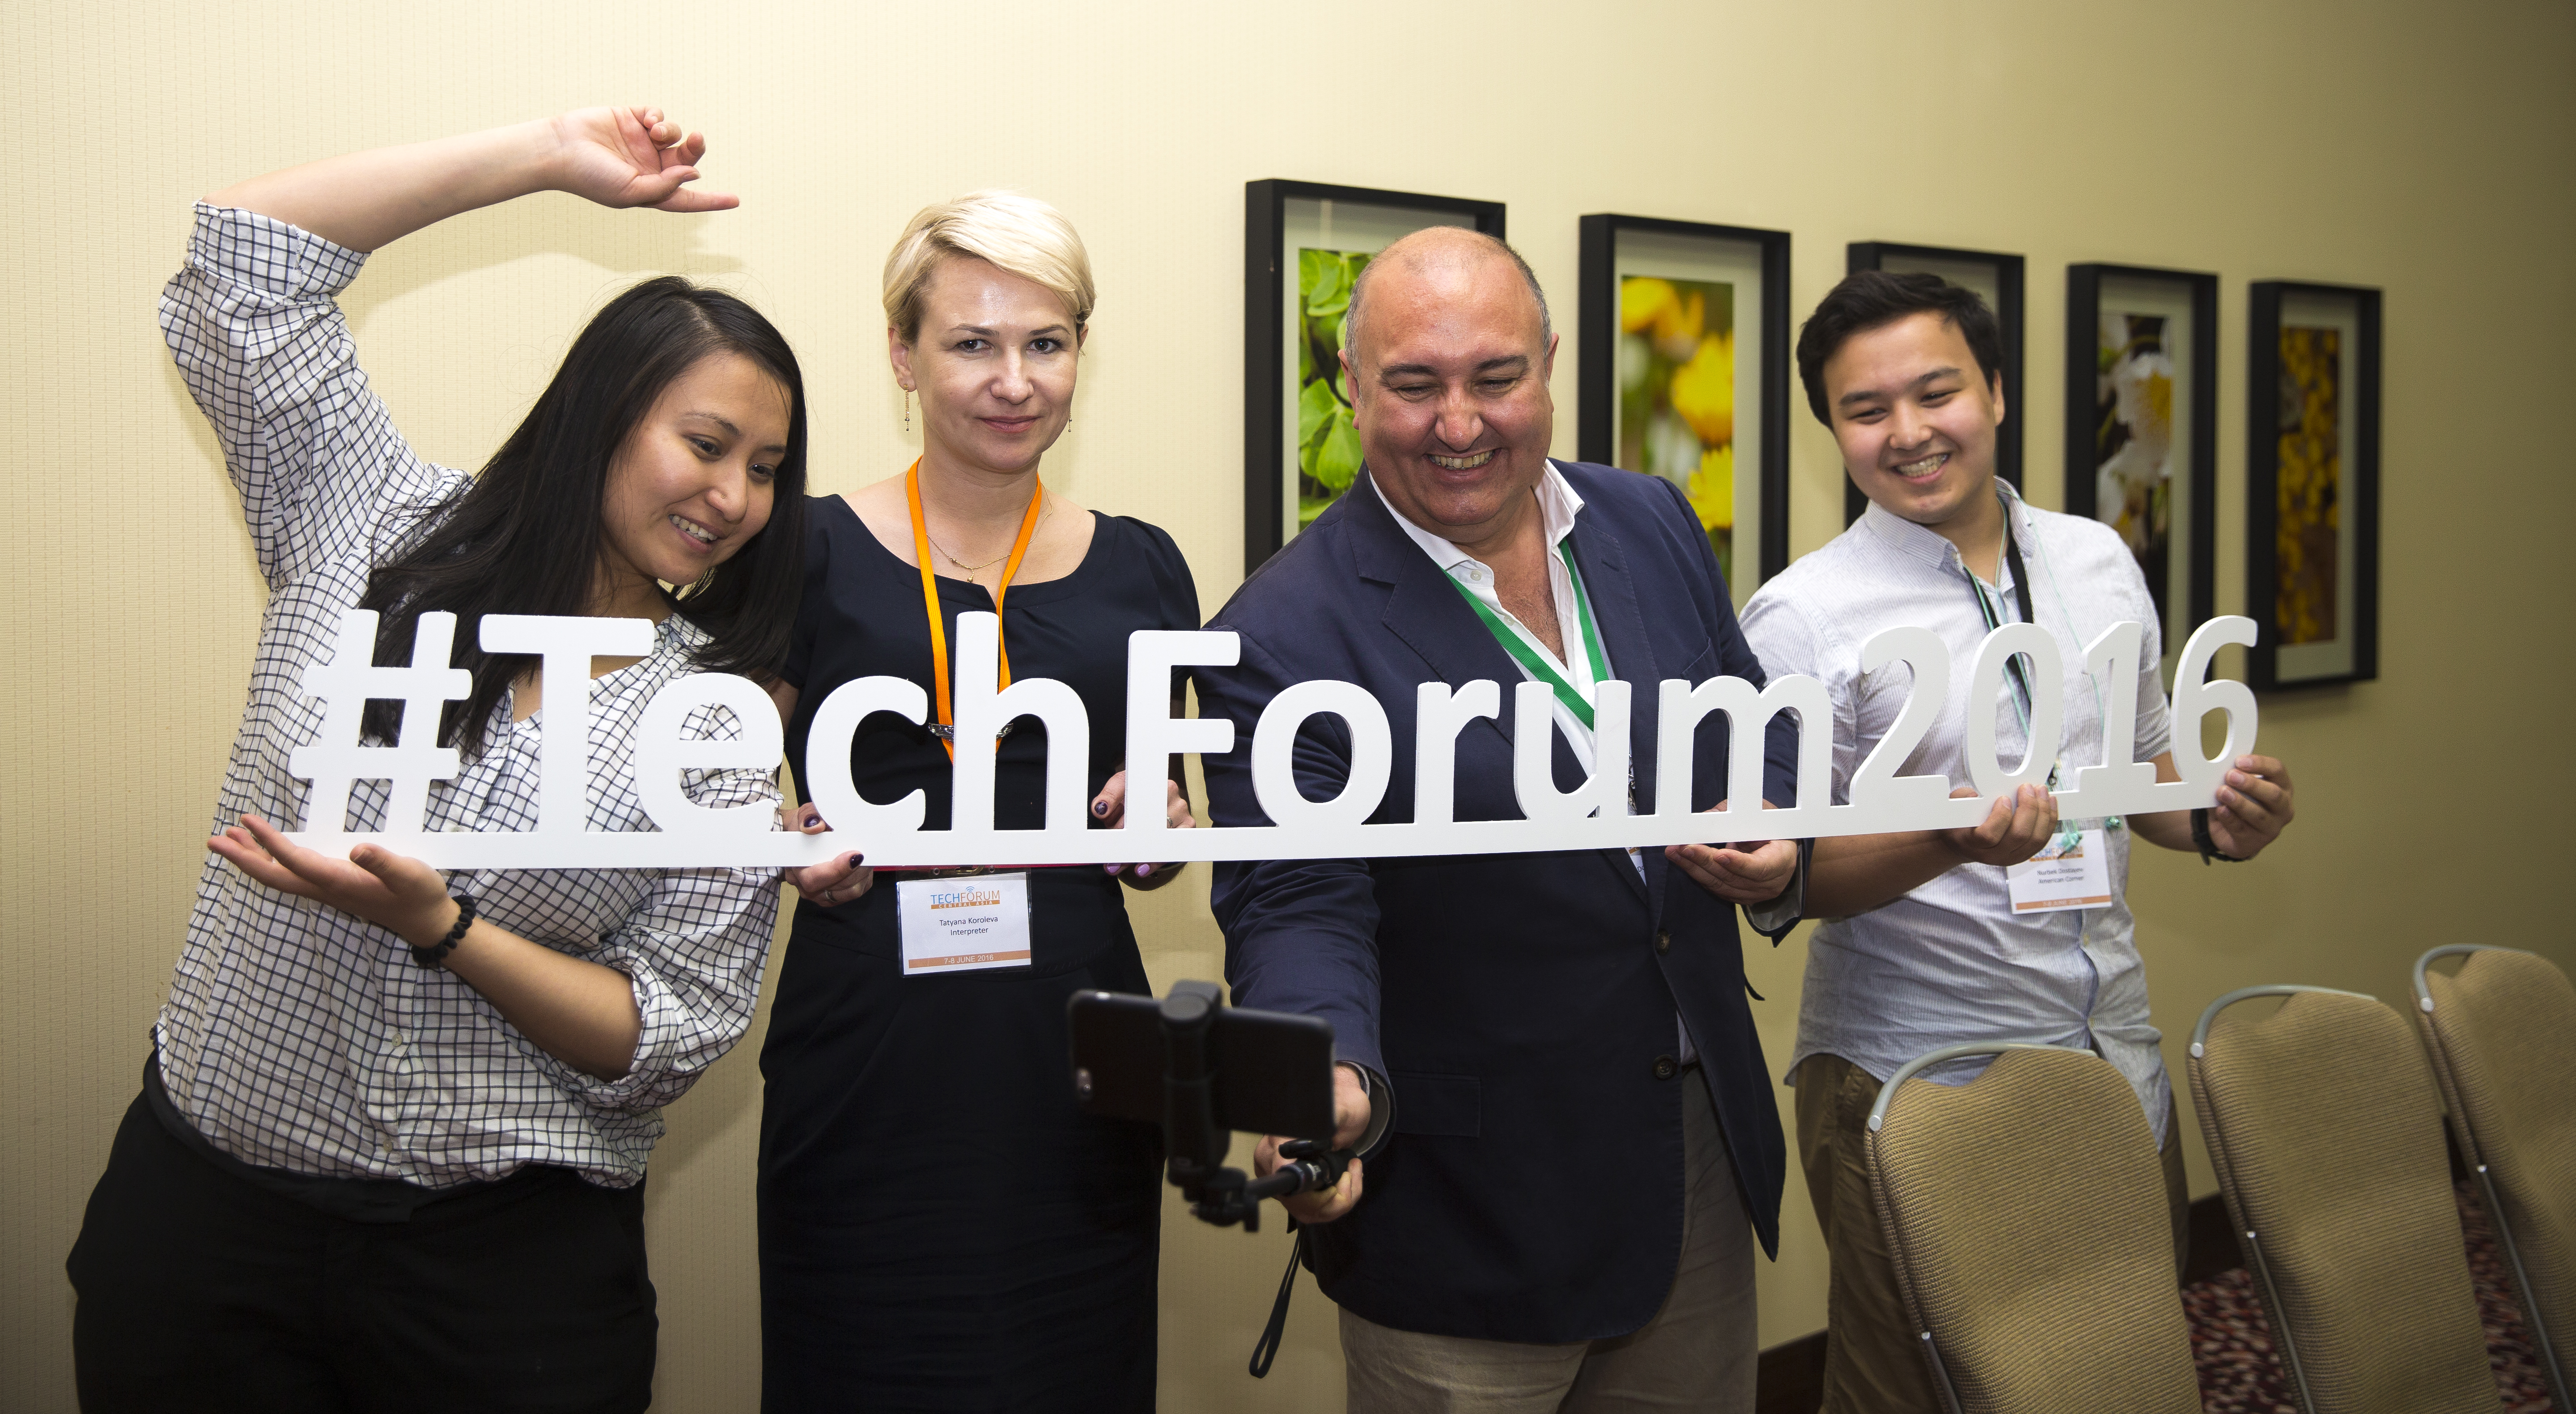 TechForum Central Asia participants and trainers posing with hashtags during a break